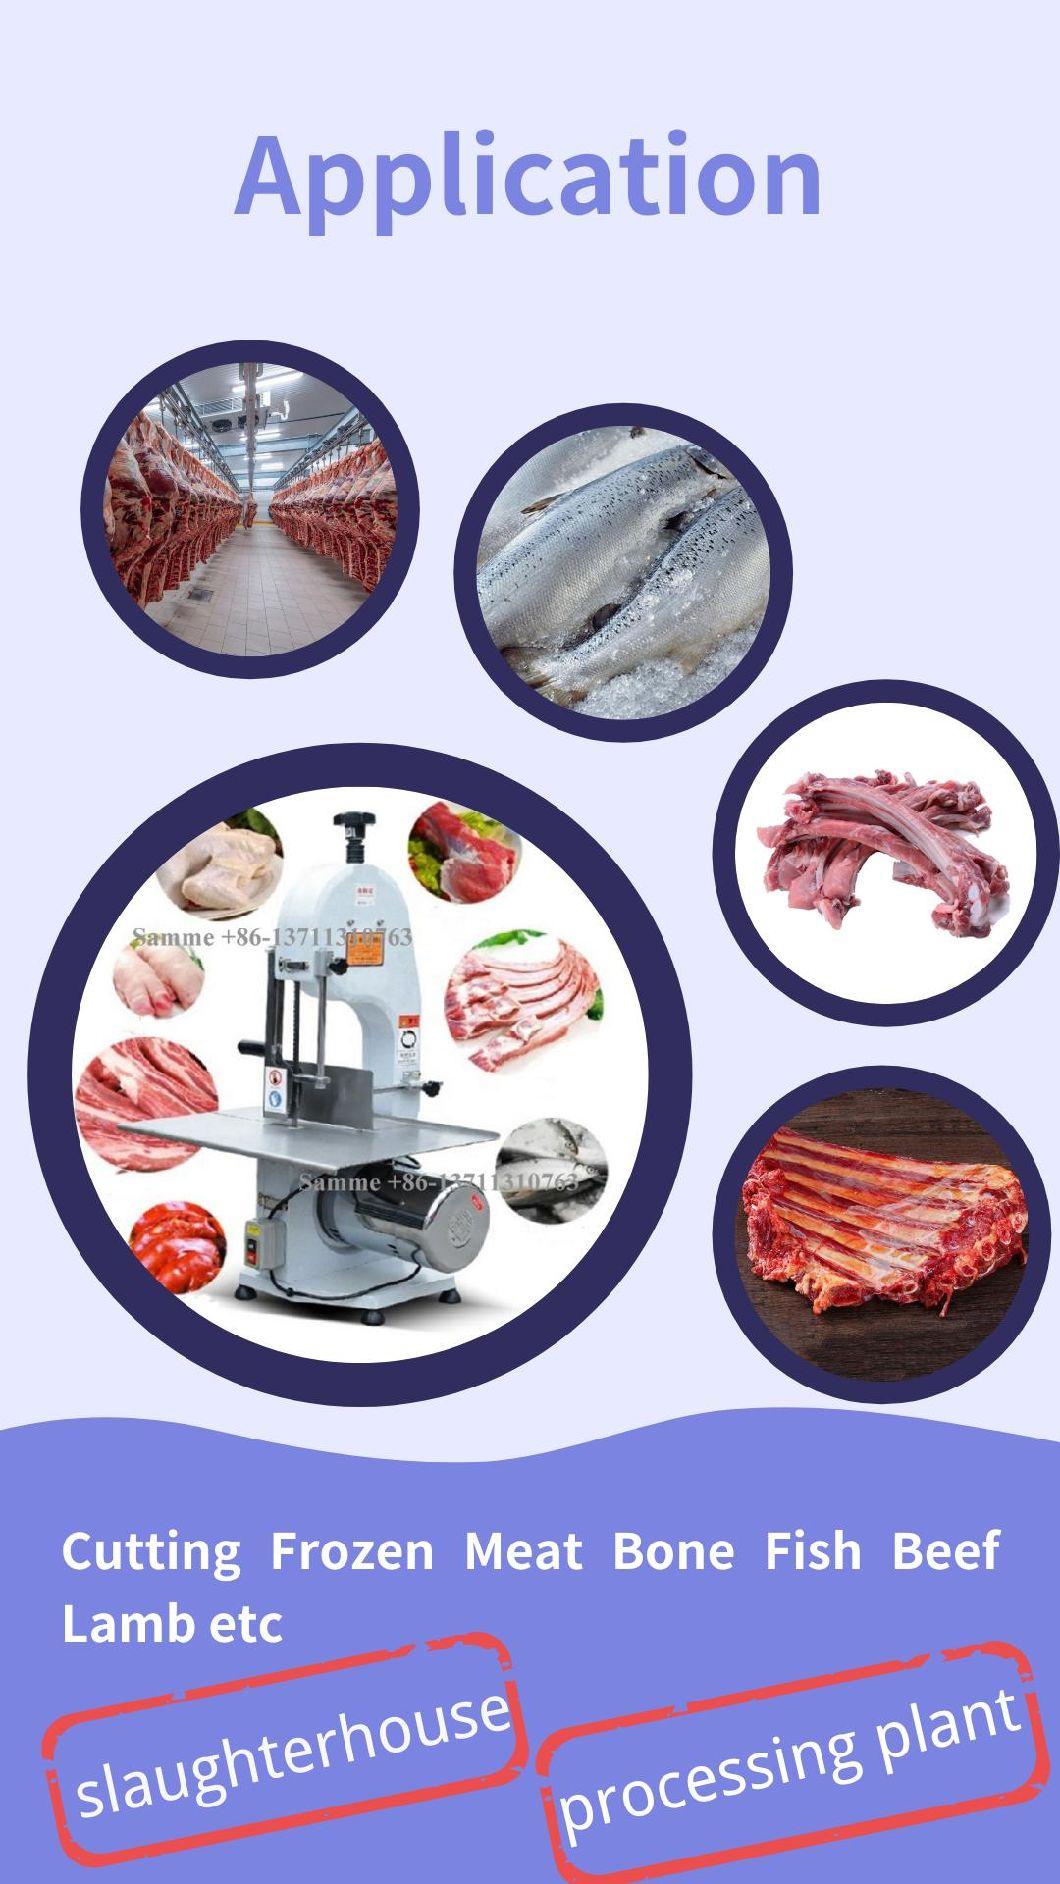 Commercial Frozen Meat Cutter Machines Vertical Meat Cutting Bandsaw